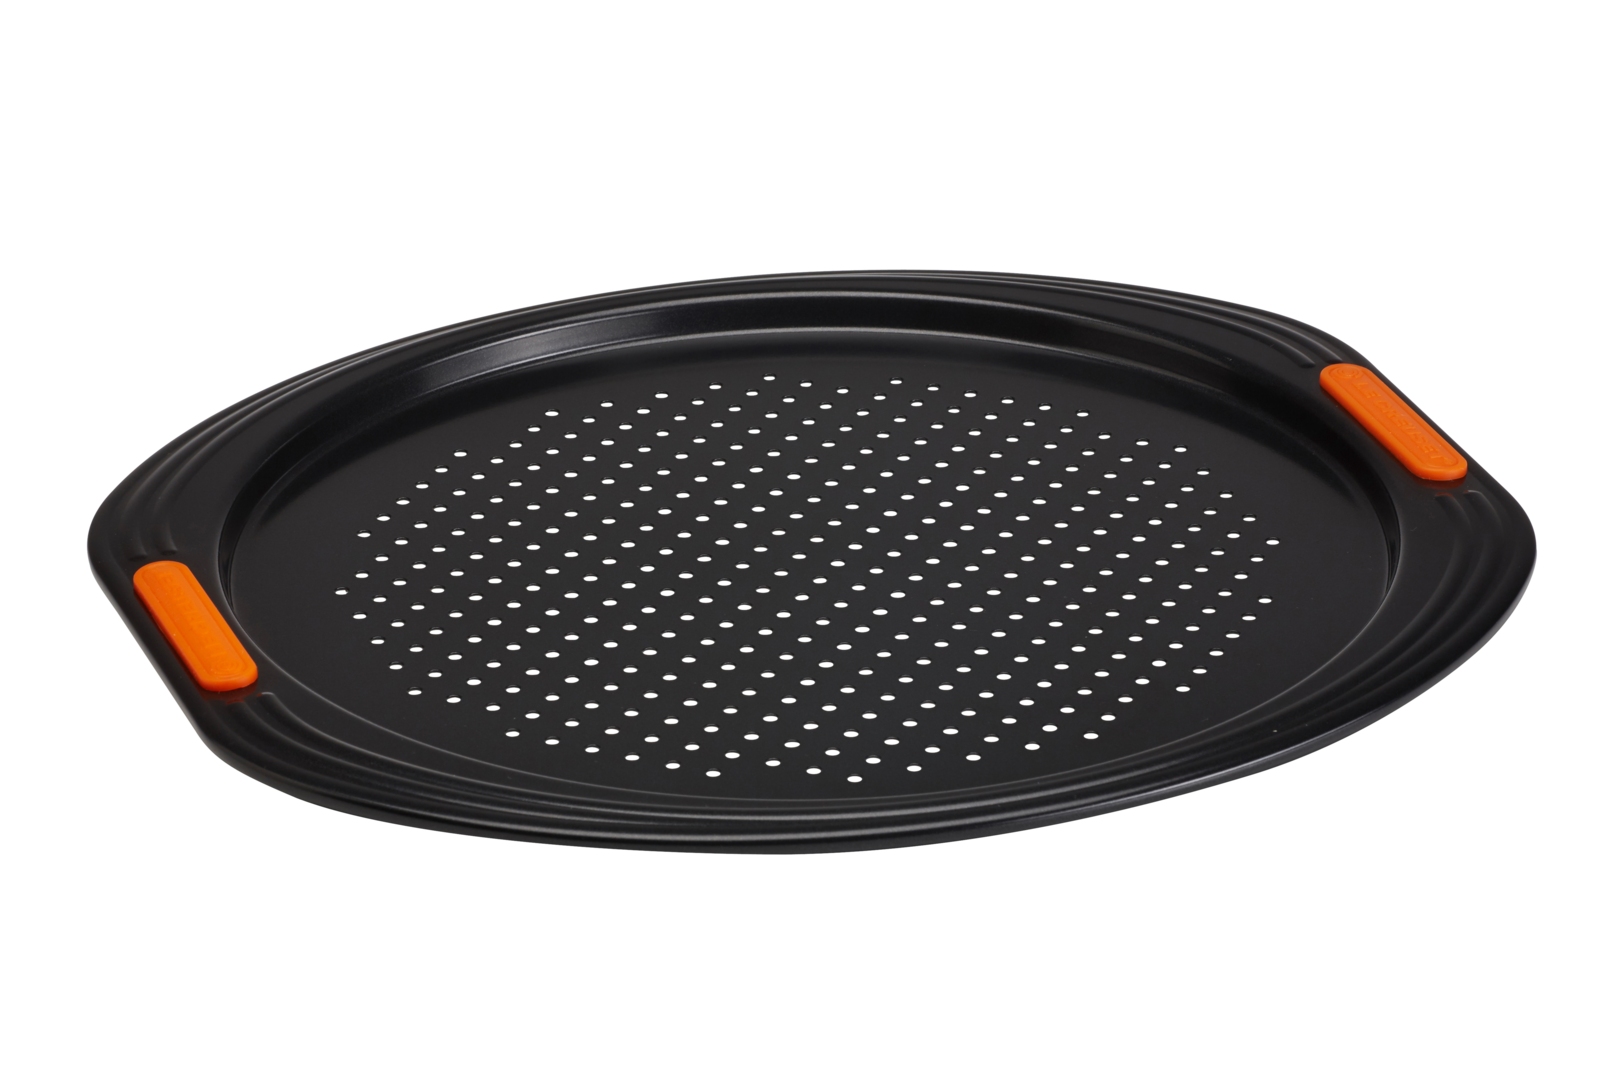 NON-STICK 26CM PERFORATED PIZZA TRAY BRAND NEW PIZZA TRAY LAST FEW REMAINING!